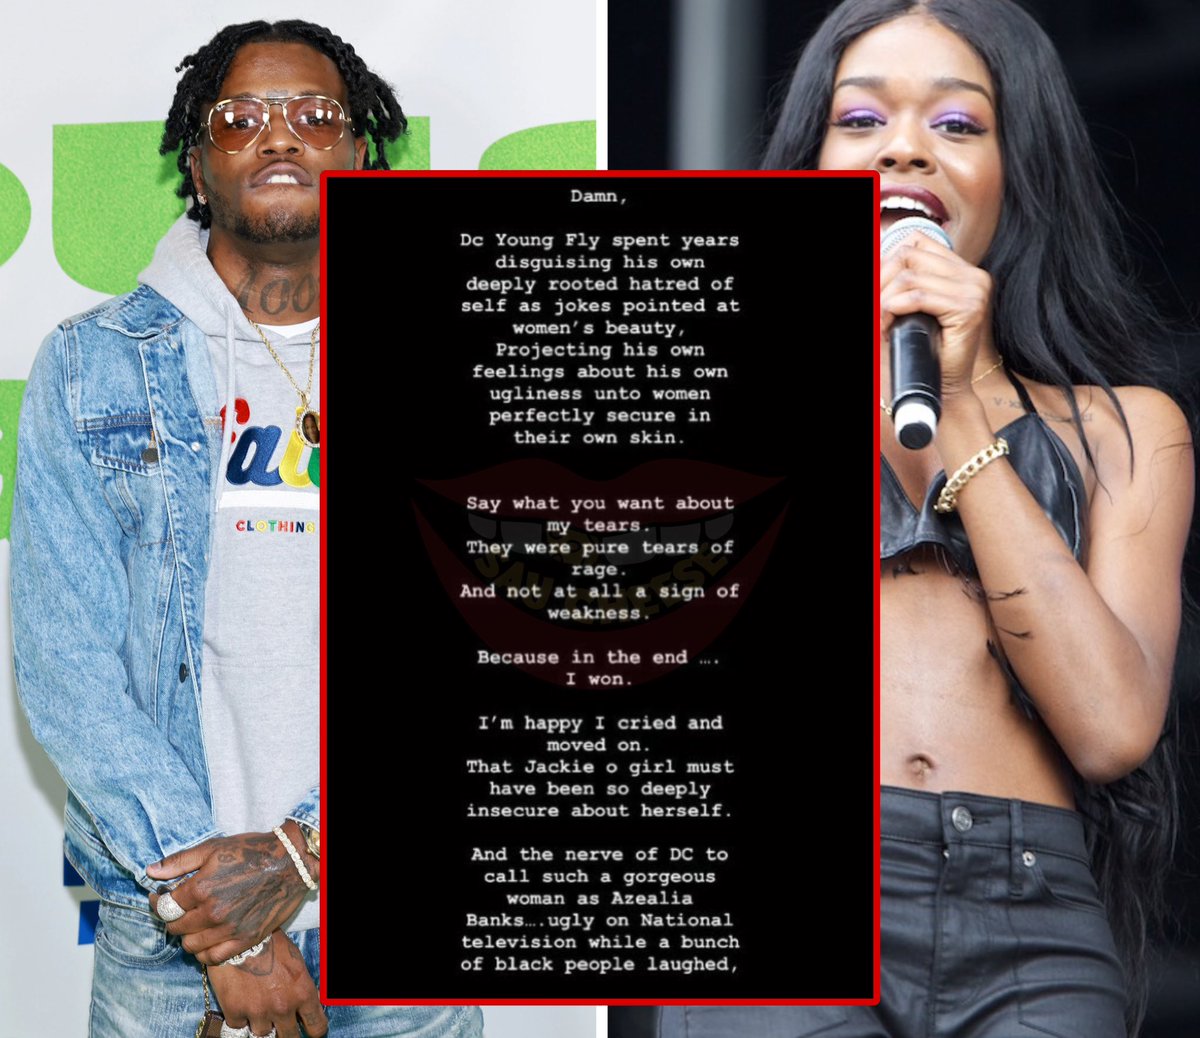 WOW! Azealia Banks sends DC Young Fly a message after he made her cry on national television a few years back.